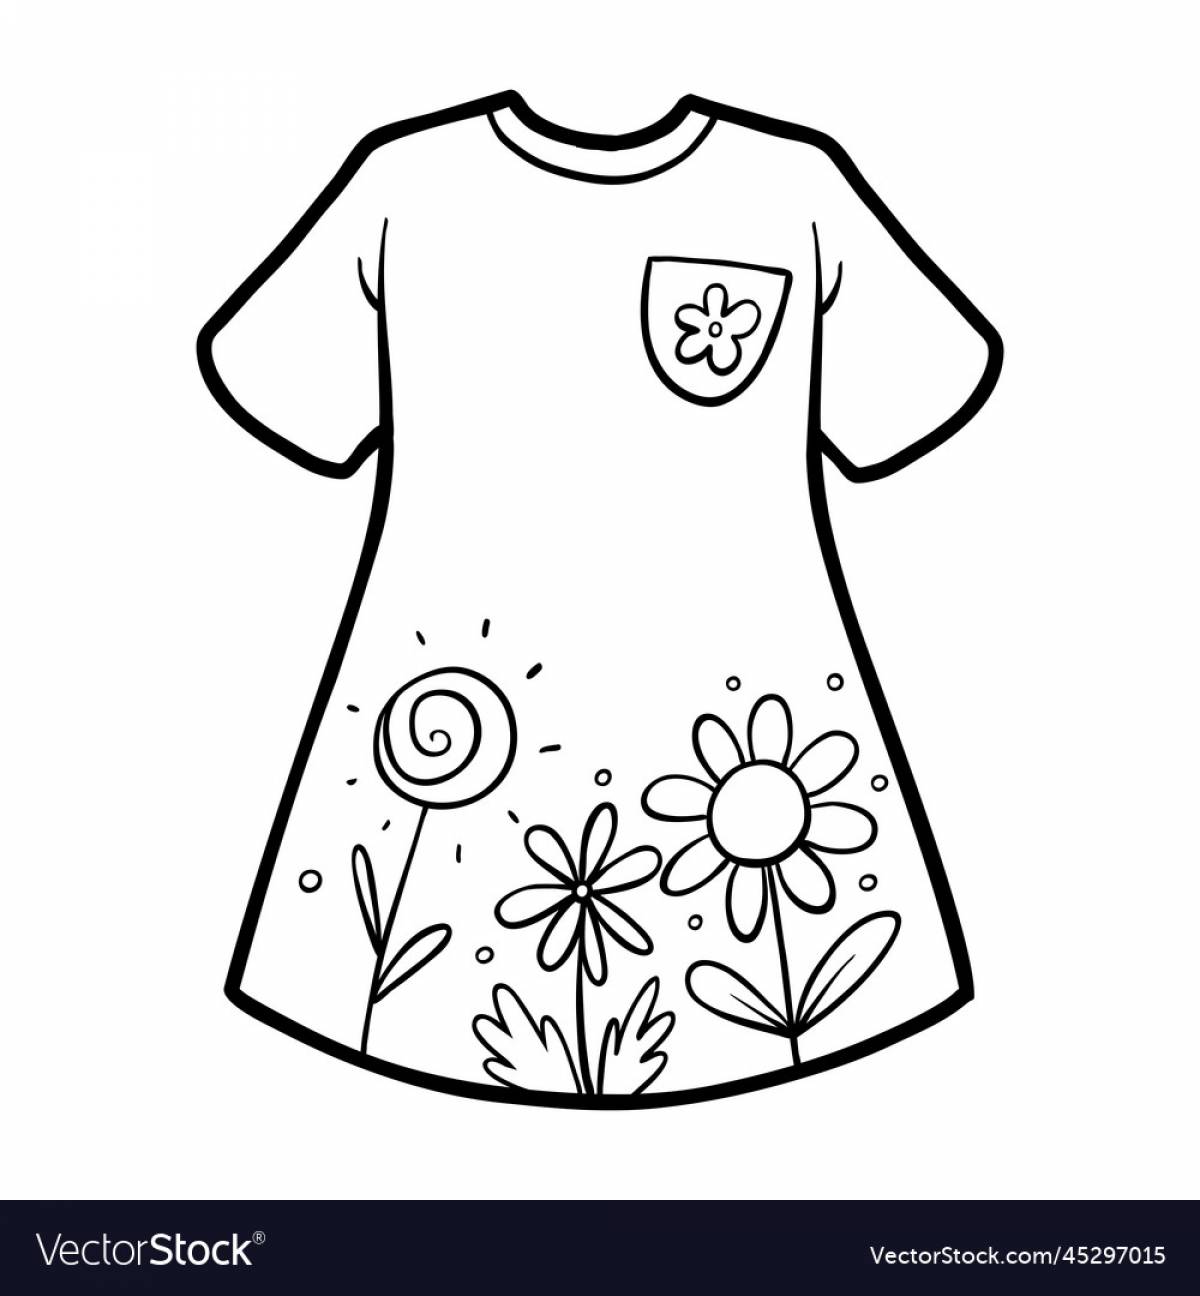 Attractive coloring dress for 5-6 year olds